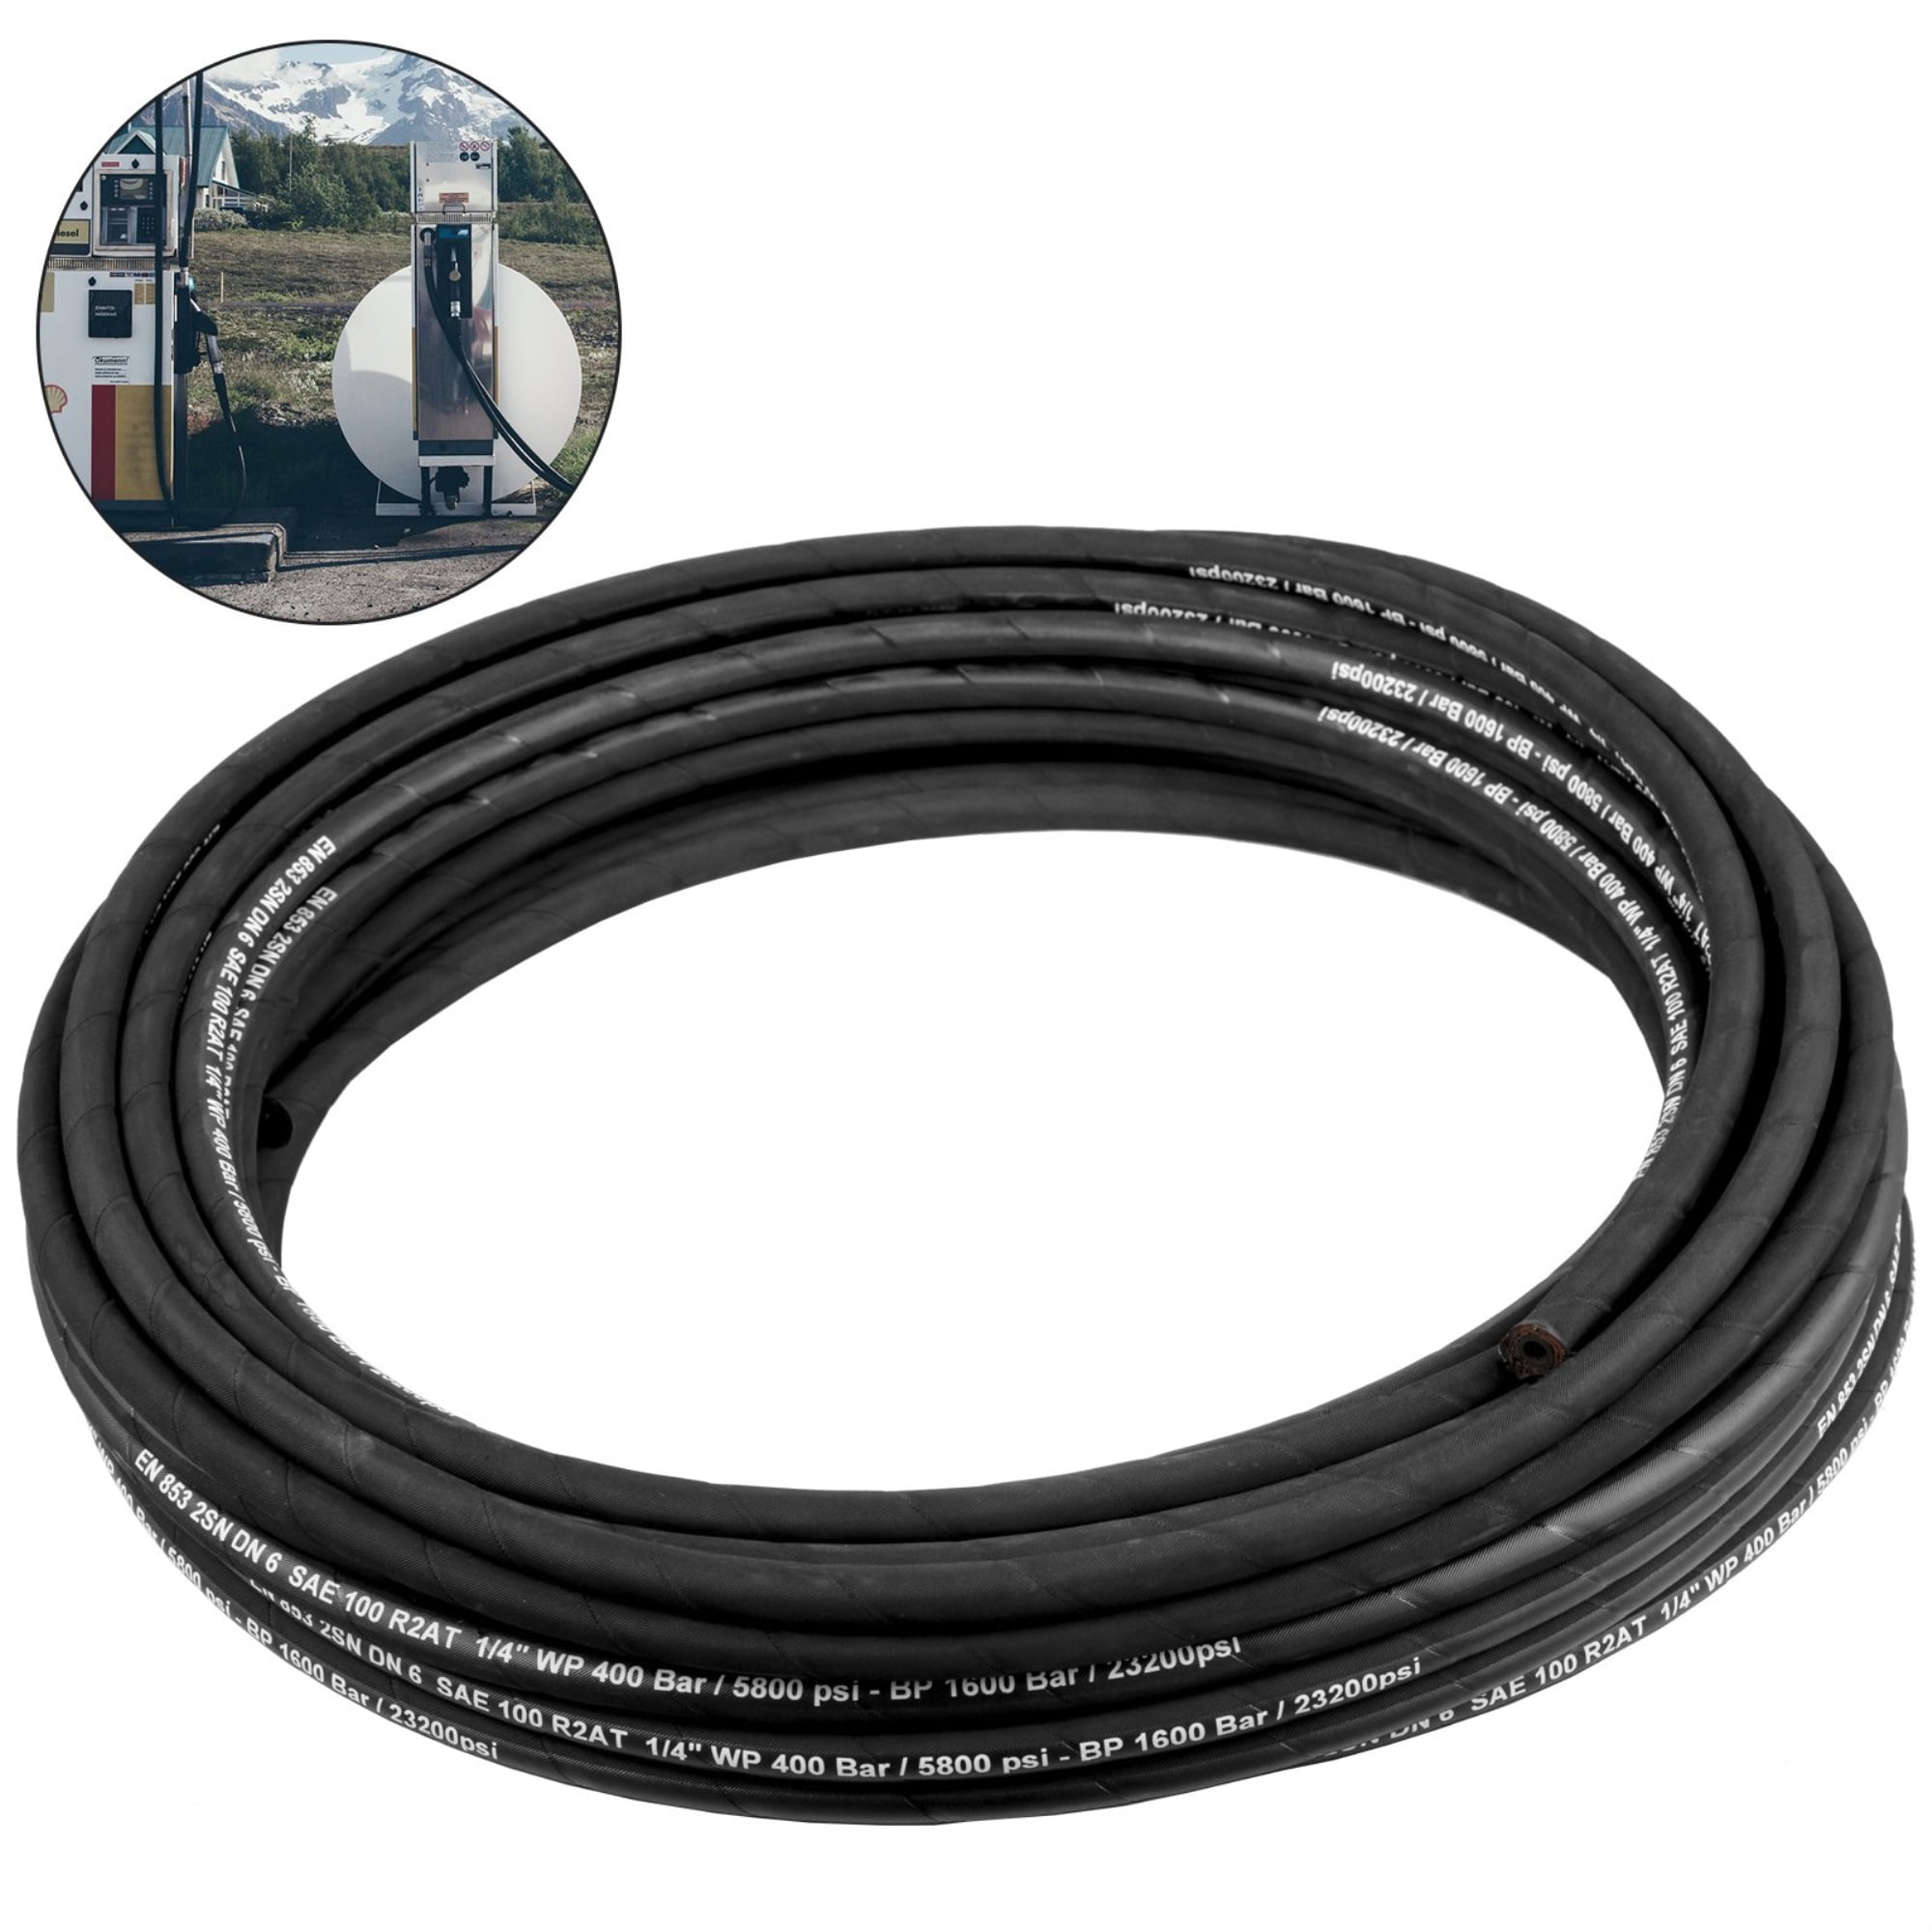 4FT 2 Wire 4800 PSI Hydraulic Hose 3/8" MNPT Fitting Both Ends 3/8" X 48" 